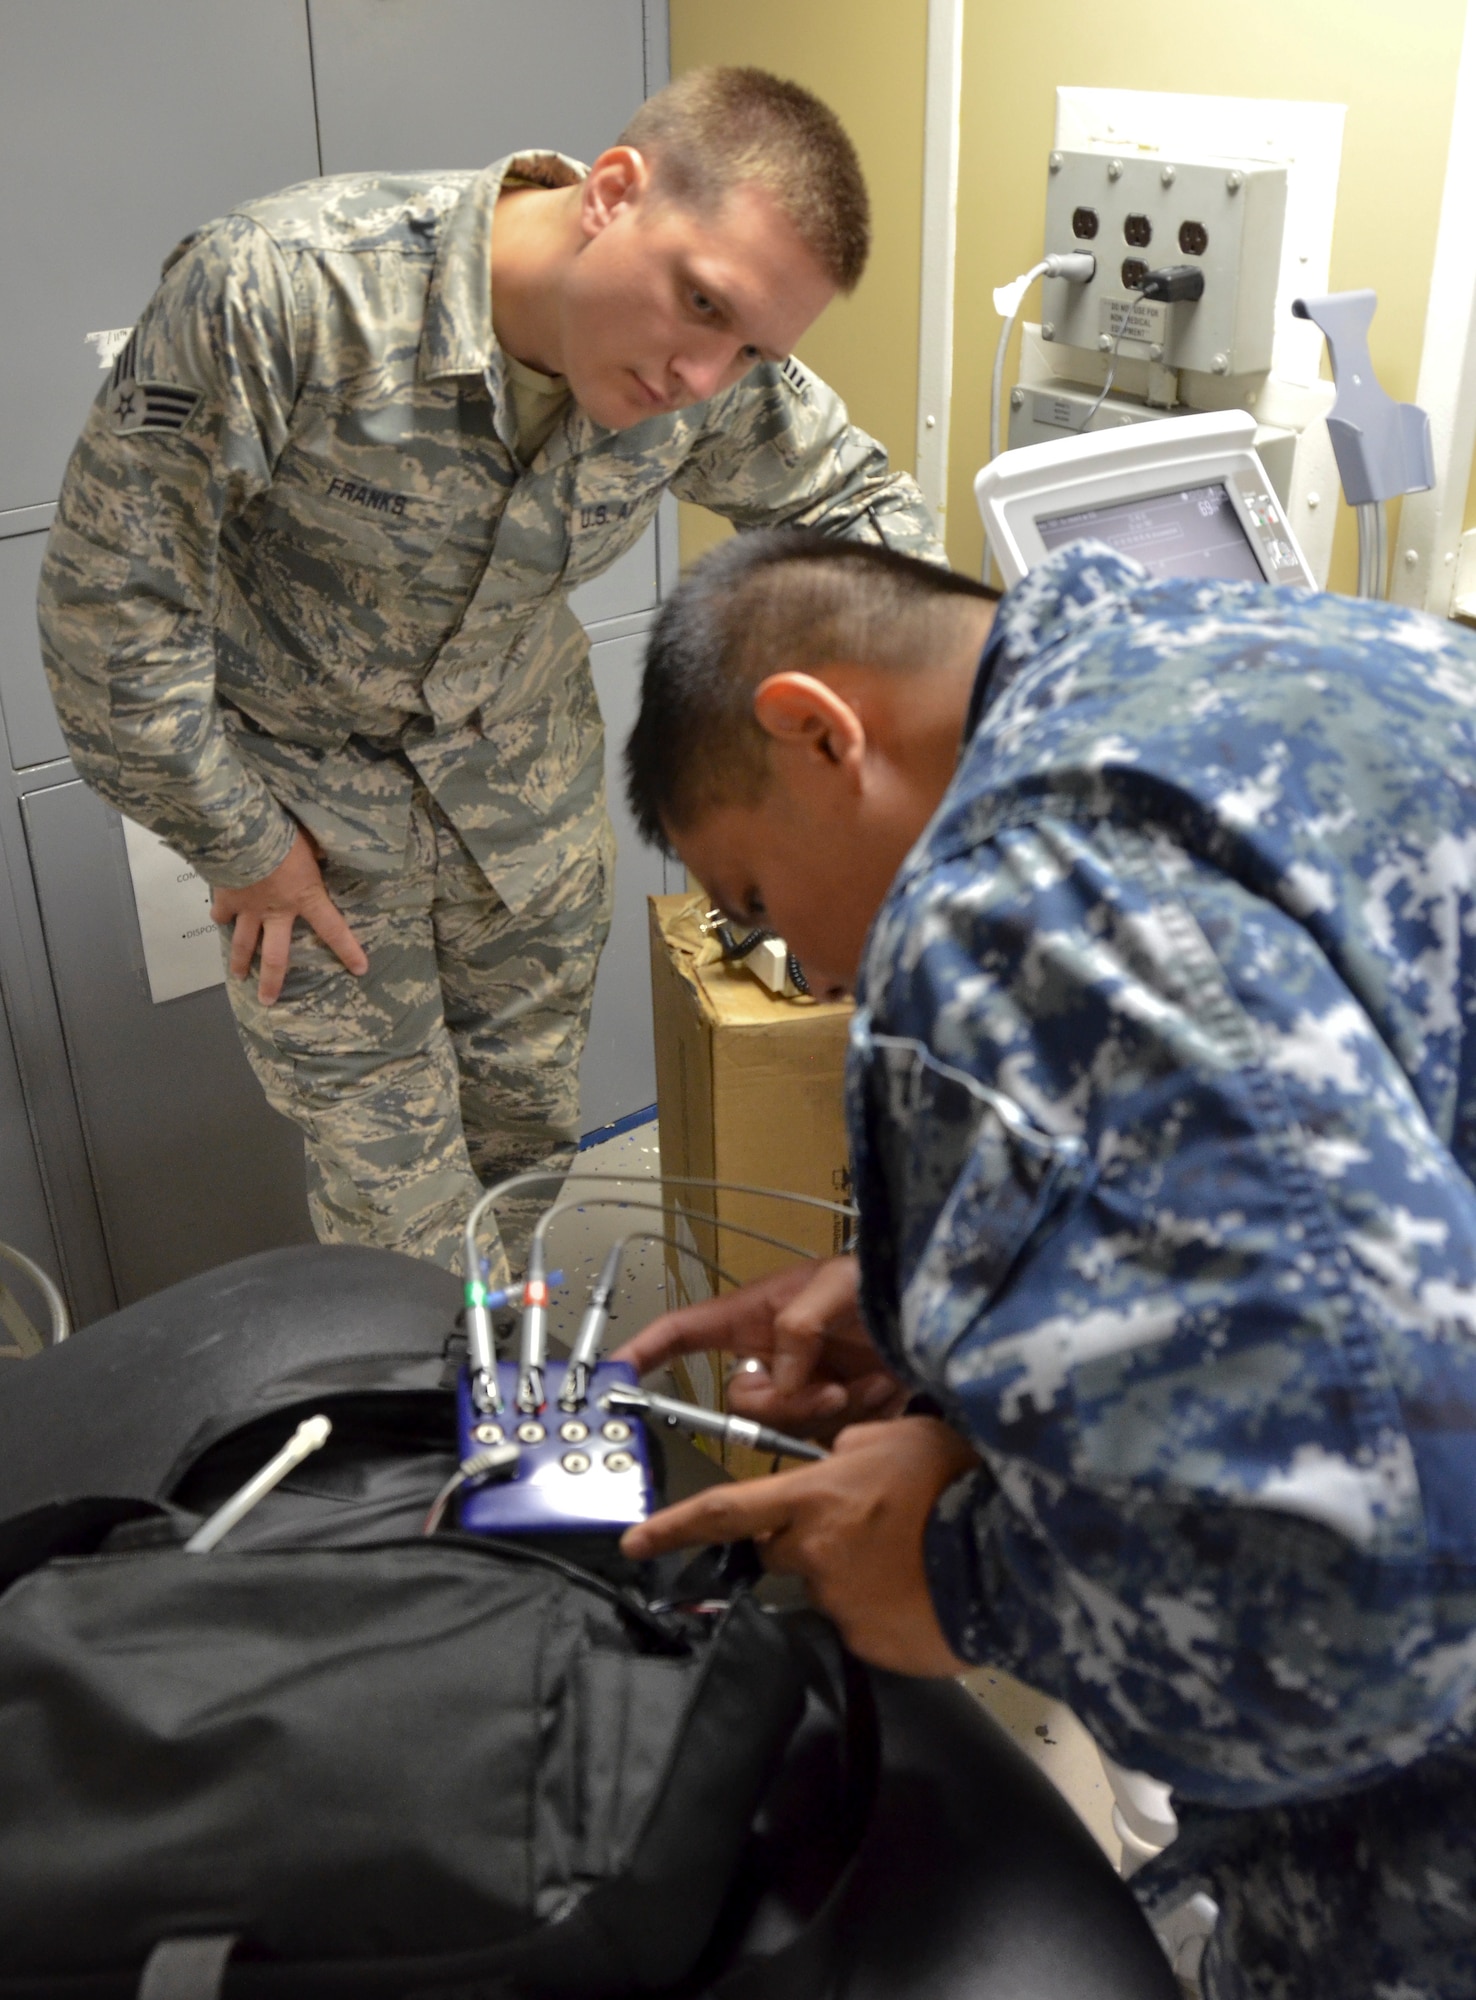 Senior Airman Jaron Franks (left), biomedical equipment technician, 117th Medical Group and Petty Officer 2nd Class Victoriano Rosales, biomedical equipment technician, 32nd Ships and Clinics, troubleshoot medical equipment on board a naval vessel in San Diego, Calif., June 22, 2016.  The 117 MDG trained with the U.S. Navy at Naval Medical Center San Diego.  The training included Airmen being implemented in real world U.S. Naval operations. (U.S. Air National Guard photo by Staff Sgt. Jeremy Farson/Released)   